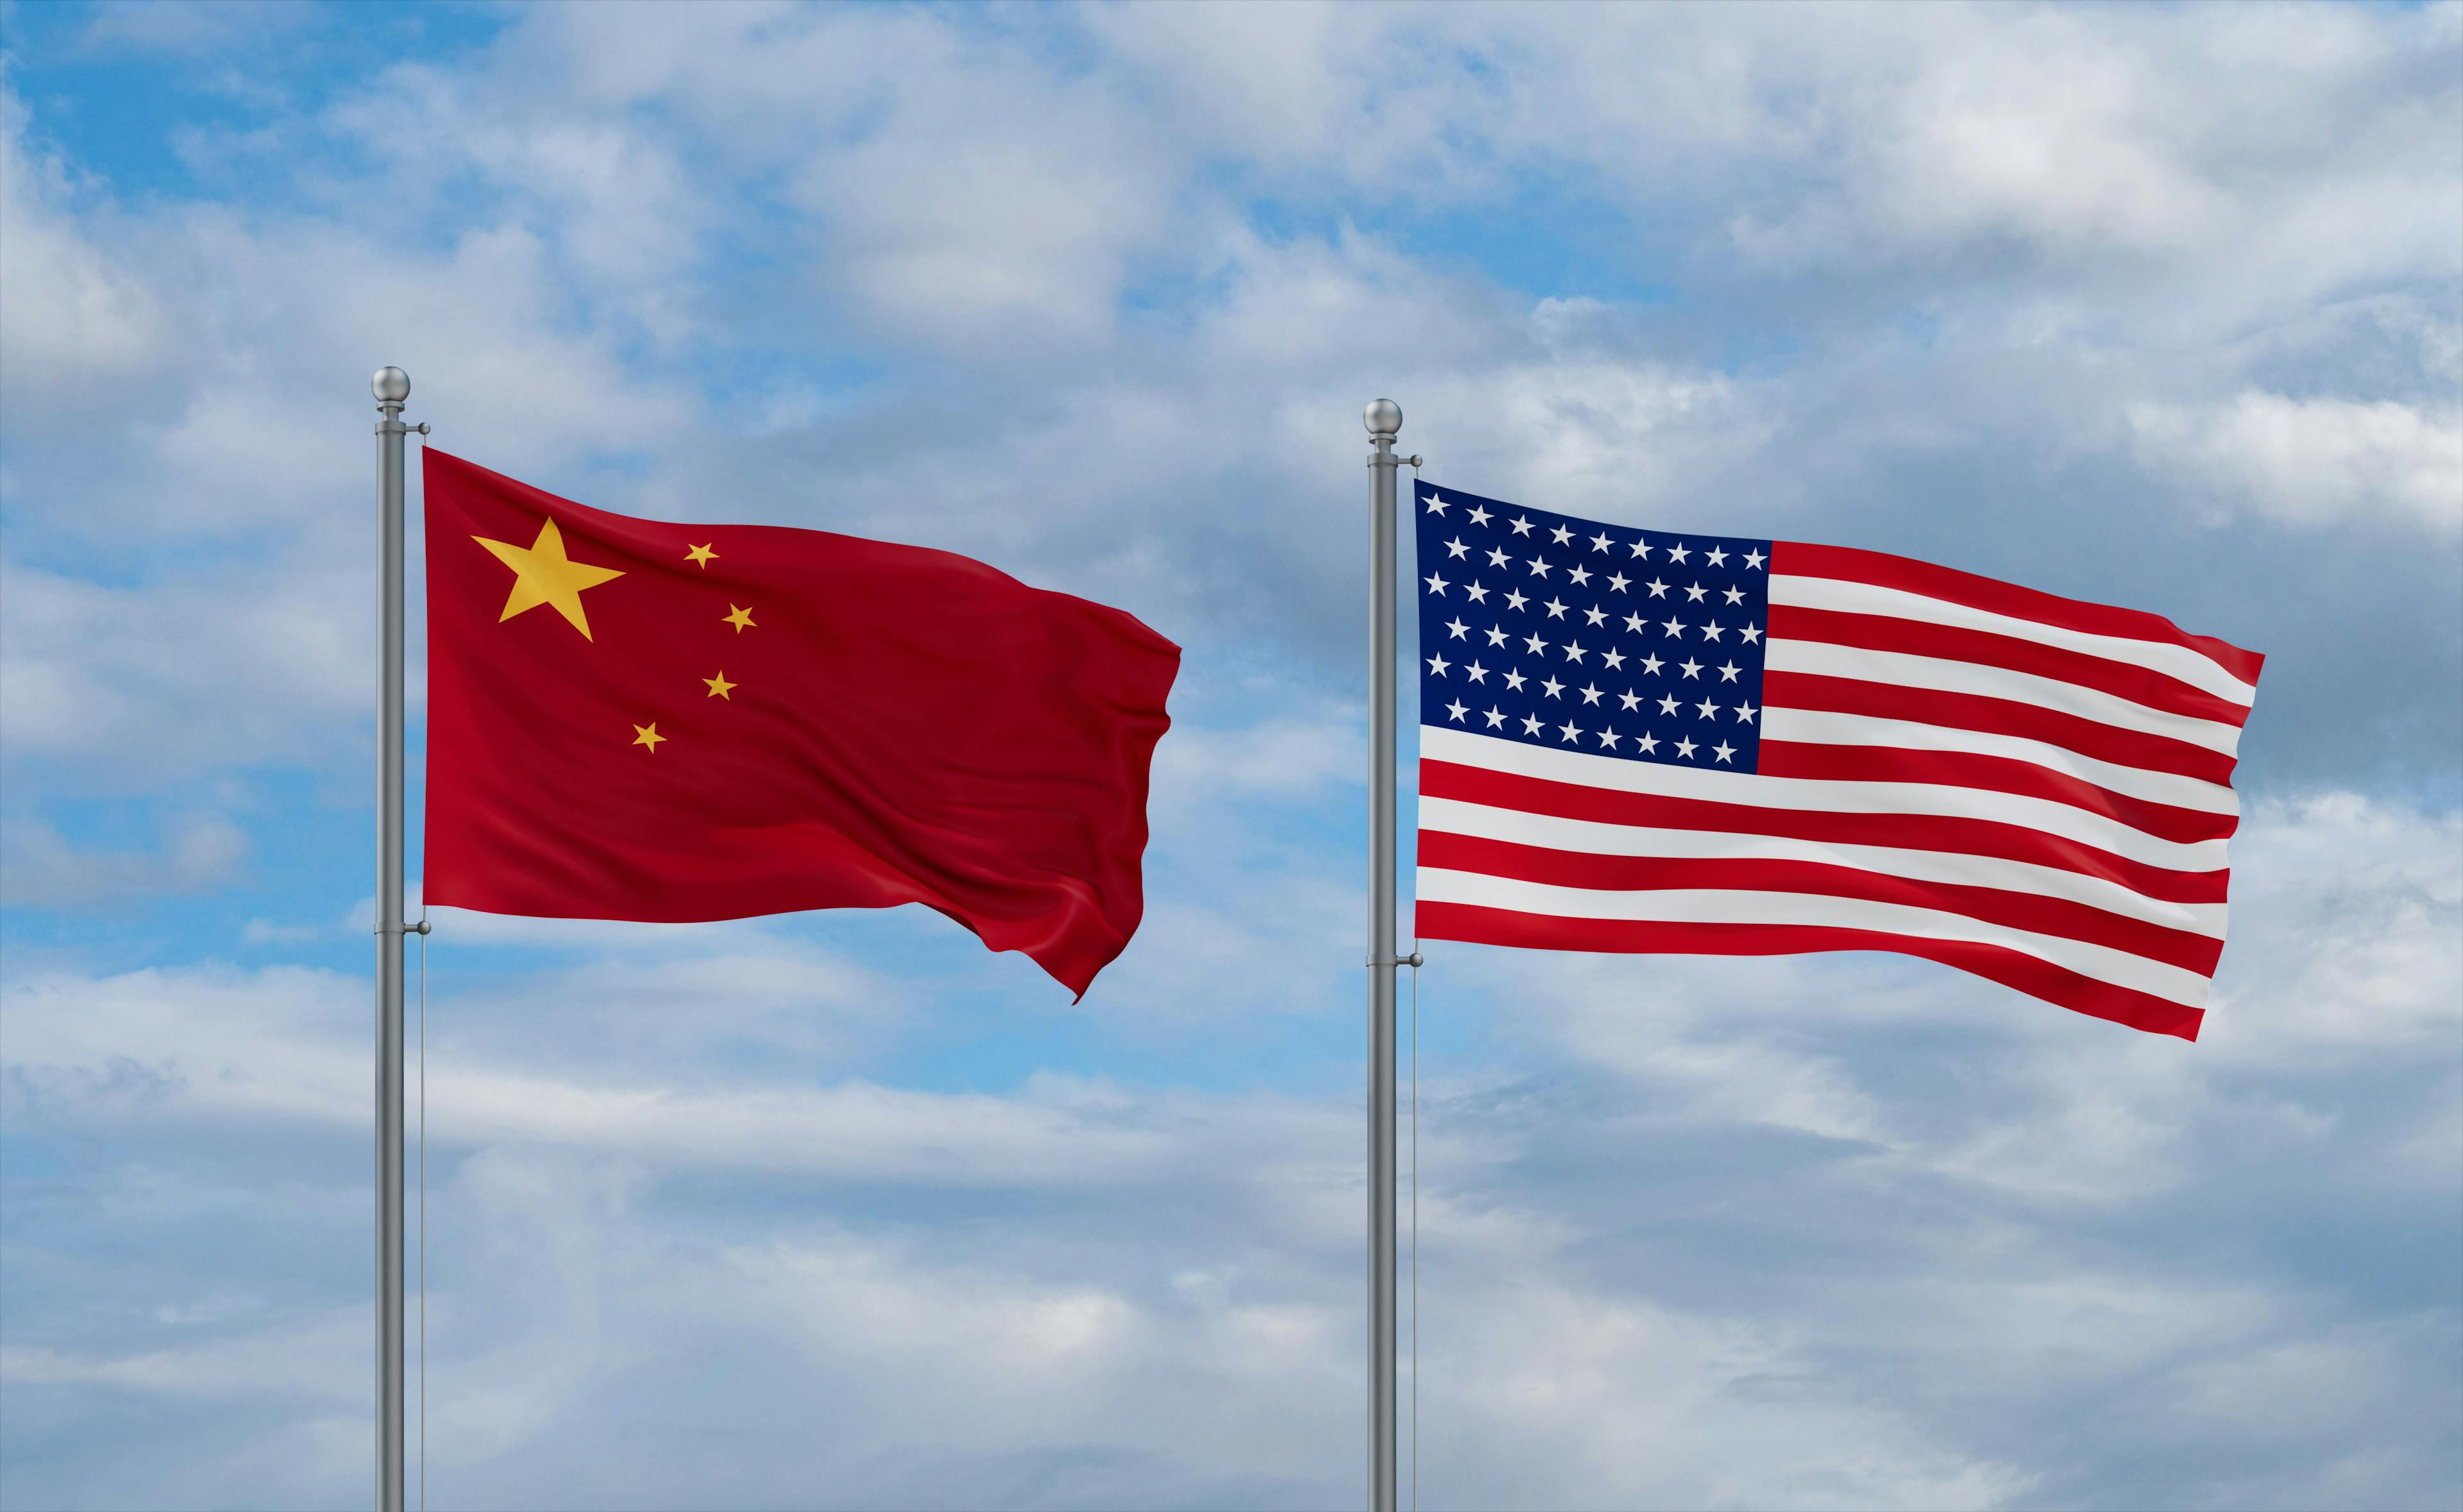 USA and China flags waving together in the wind on blue cloudy sky, two country relationship concept Model Released Property Released 